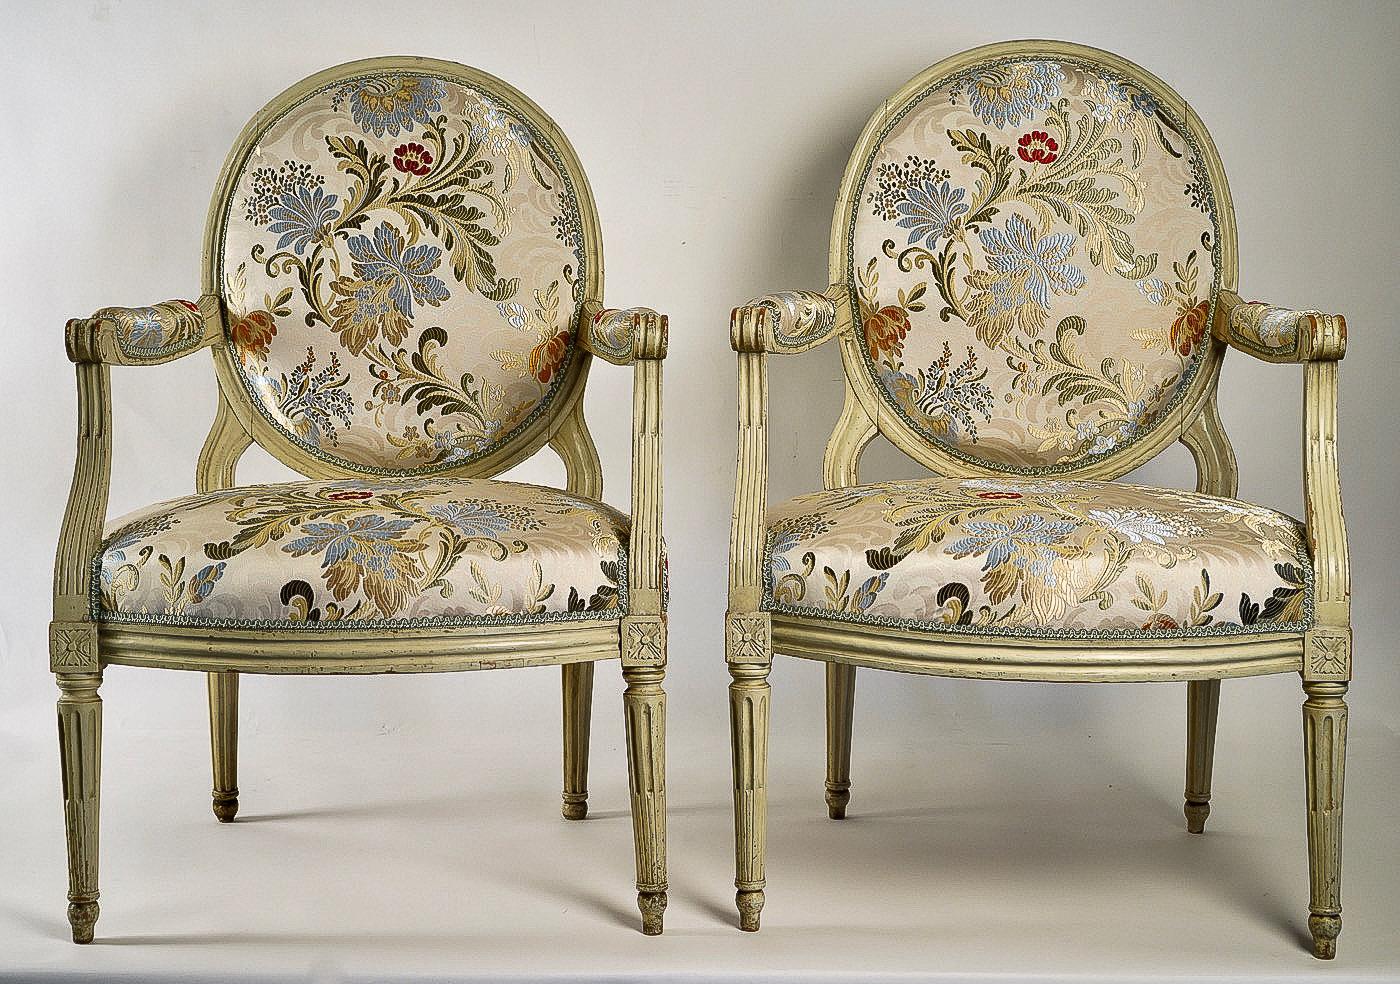 French Louis XVI period, Lacquered beechwood pair of large armchairs, circa 1780 

An excellent and decorative pair of large armchairs, in hand-carved lacquered beechwood.

Late 18th century, French work in the classic Louis XVI style, circa